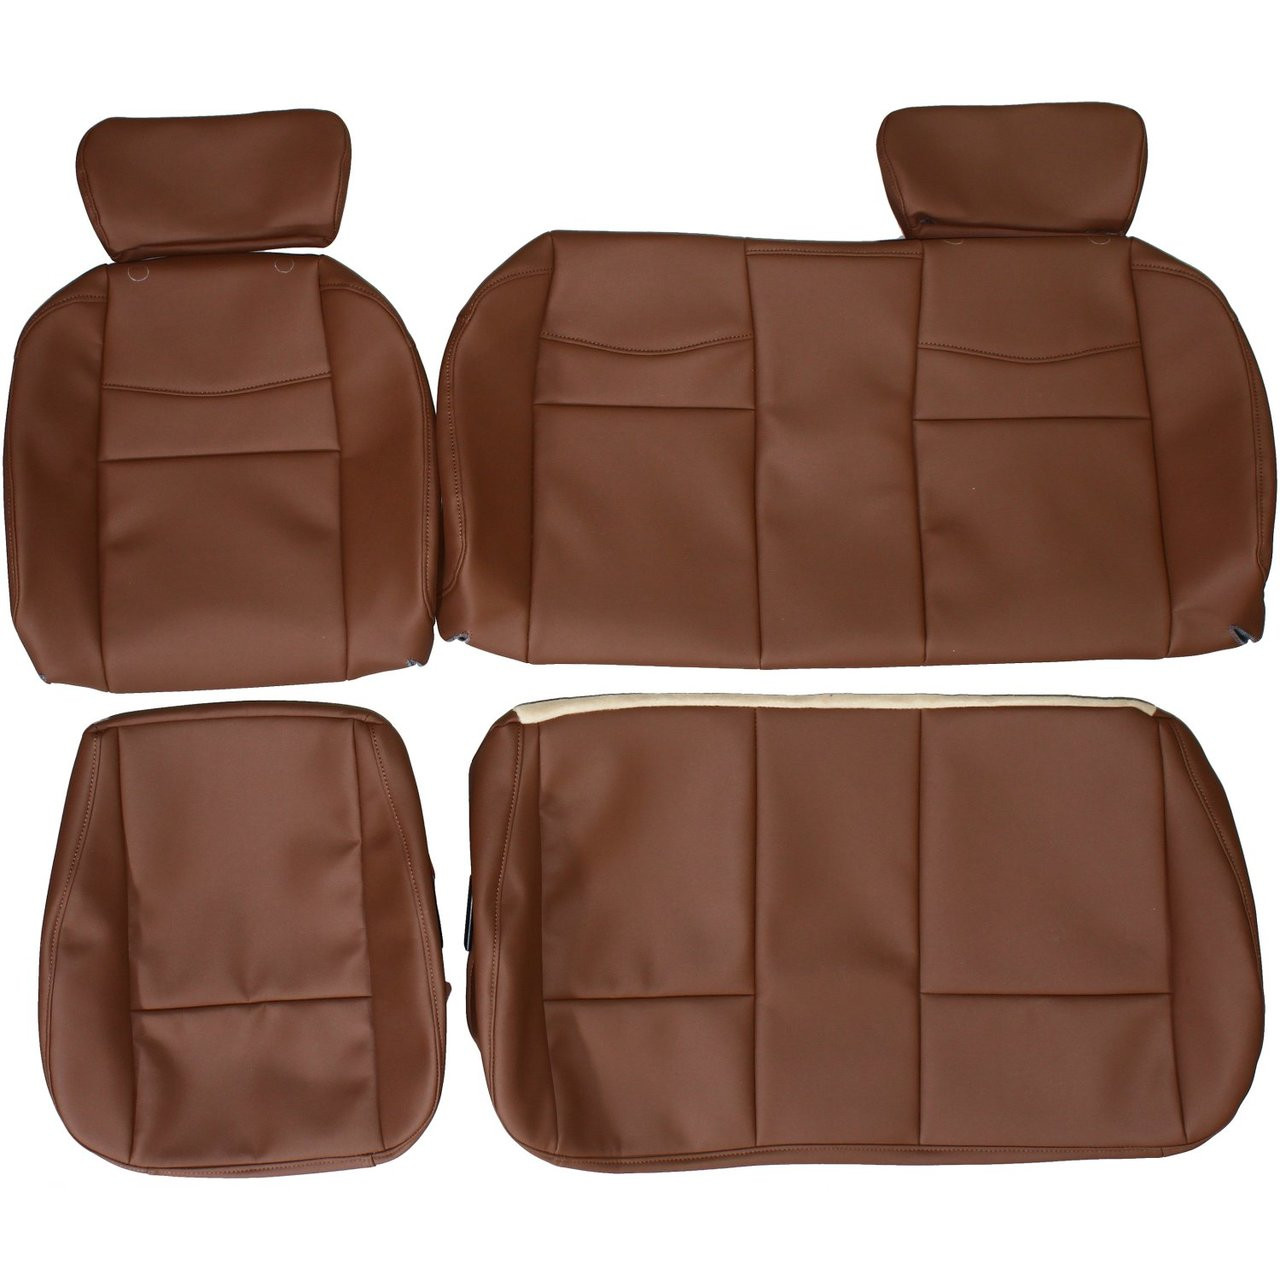 2001-2003 Ford F-150 King Ranch Crew Custom Real Leather Seat Covers (Rear)  - Lseat.com